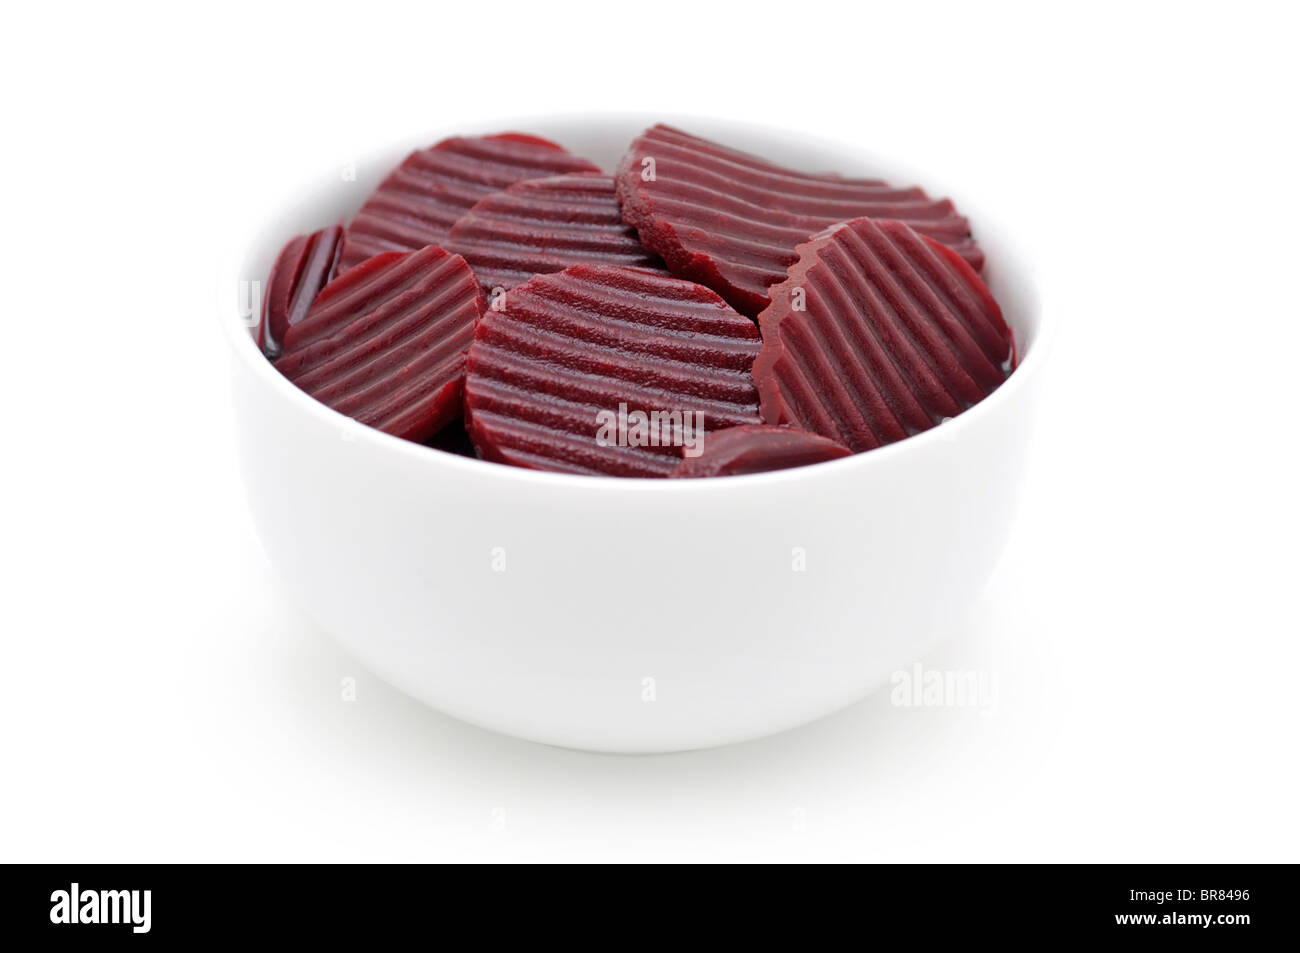 Bowl of Sliced Beets (Beetroot) Stock Photo